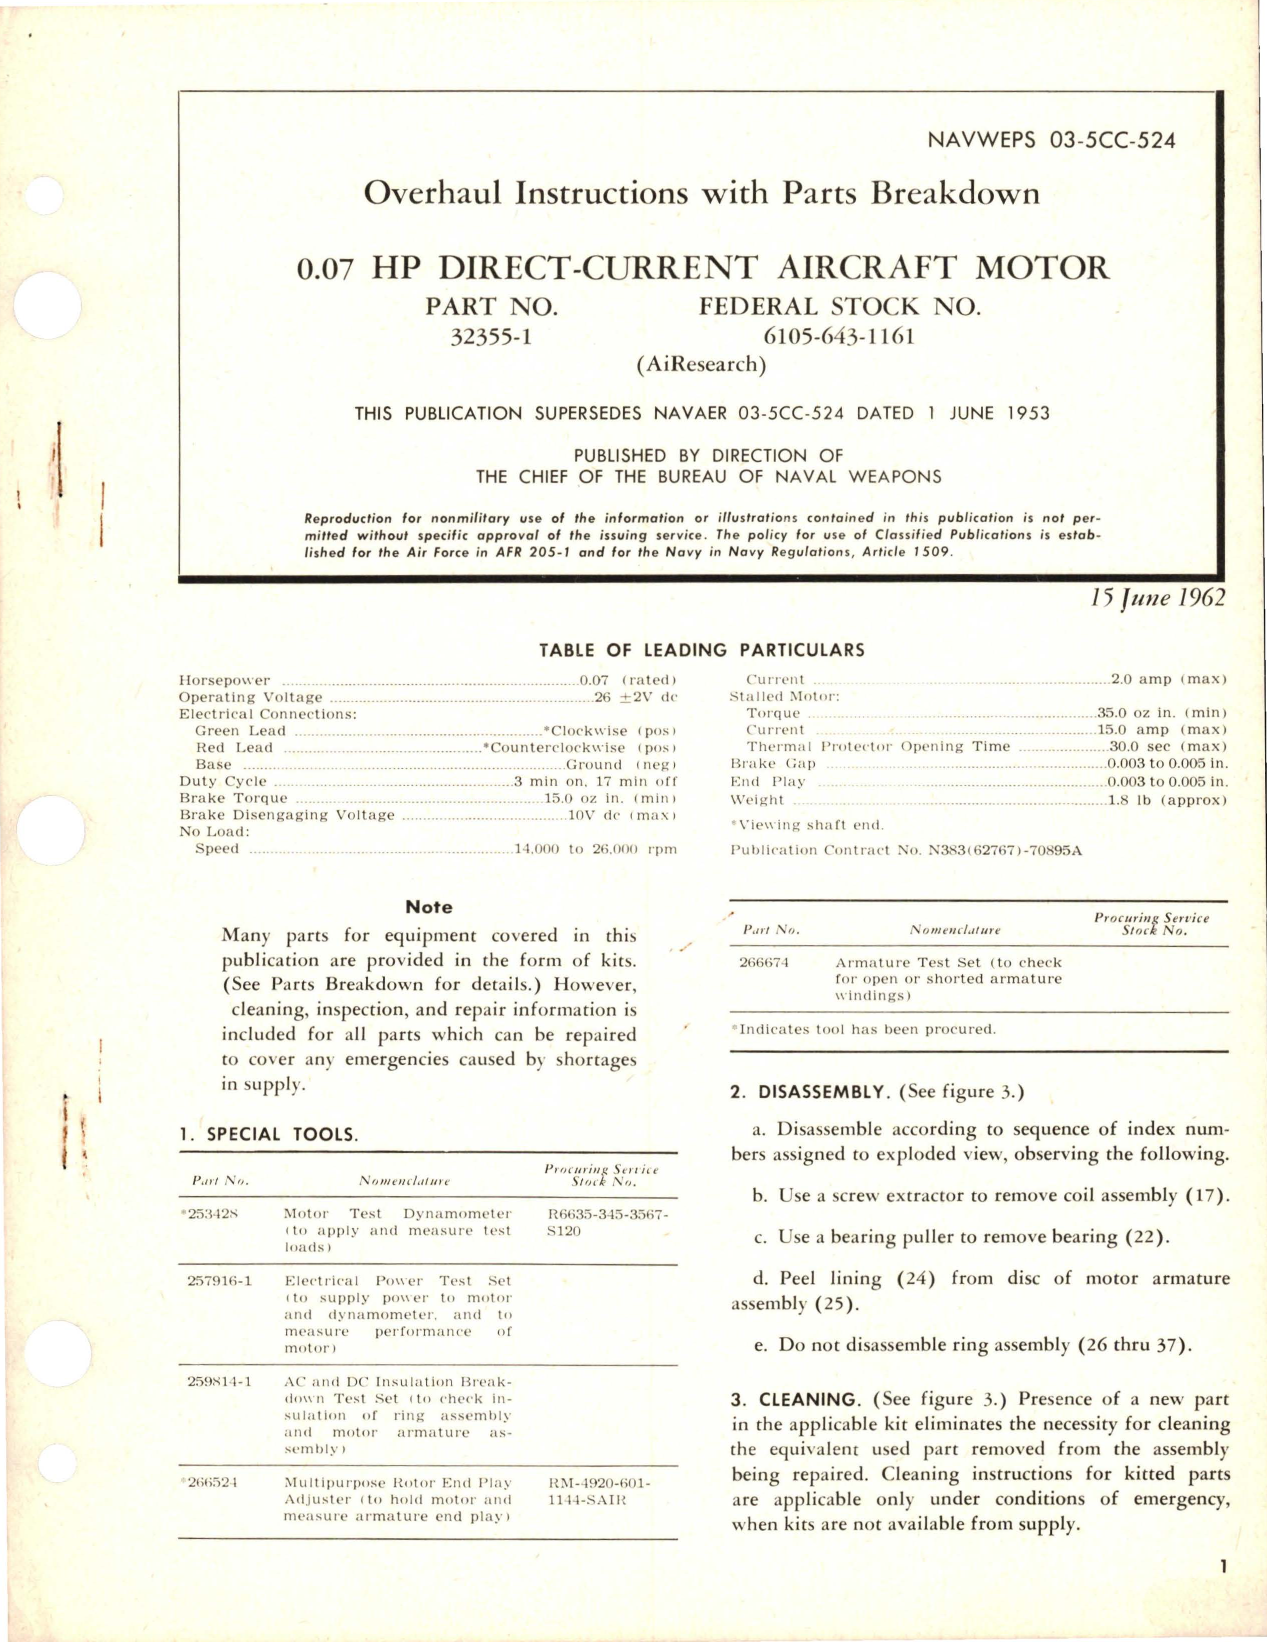 Sample page 1 from AirCorps Library document: Overhaul Instructions with Parts Breakdown for Direct Current Aircraft Motor - 0.07 HP - Part 32355-1